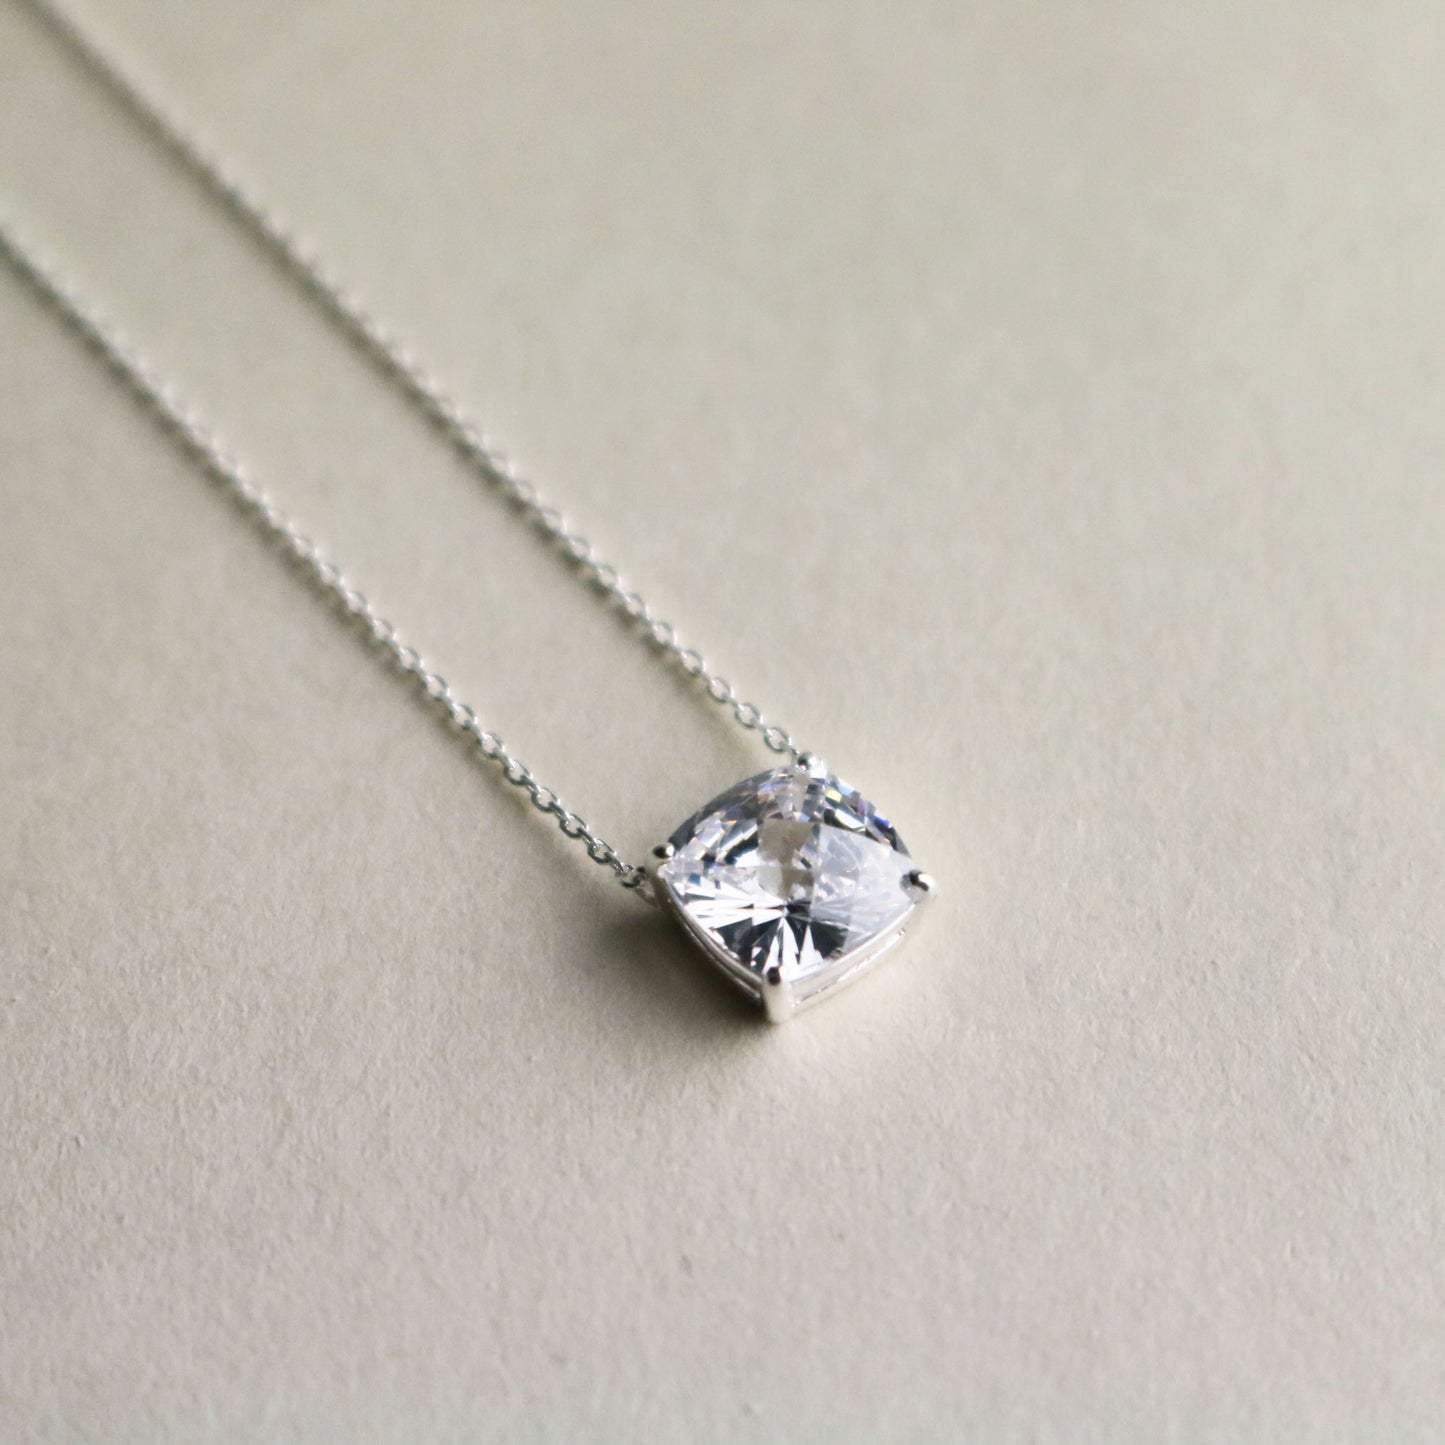 Silver 925 Large cubic zirconia necklace